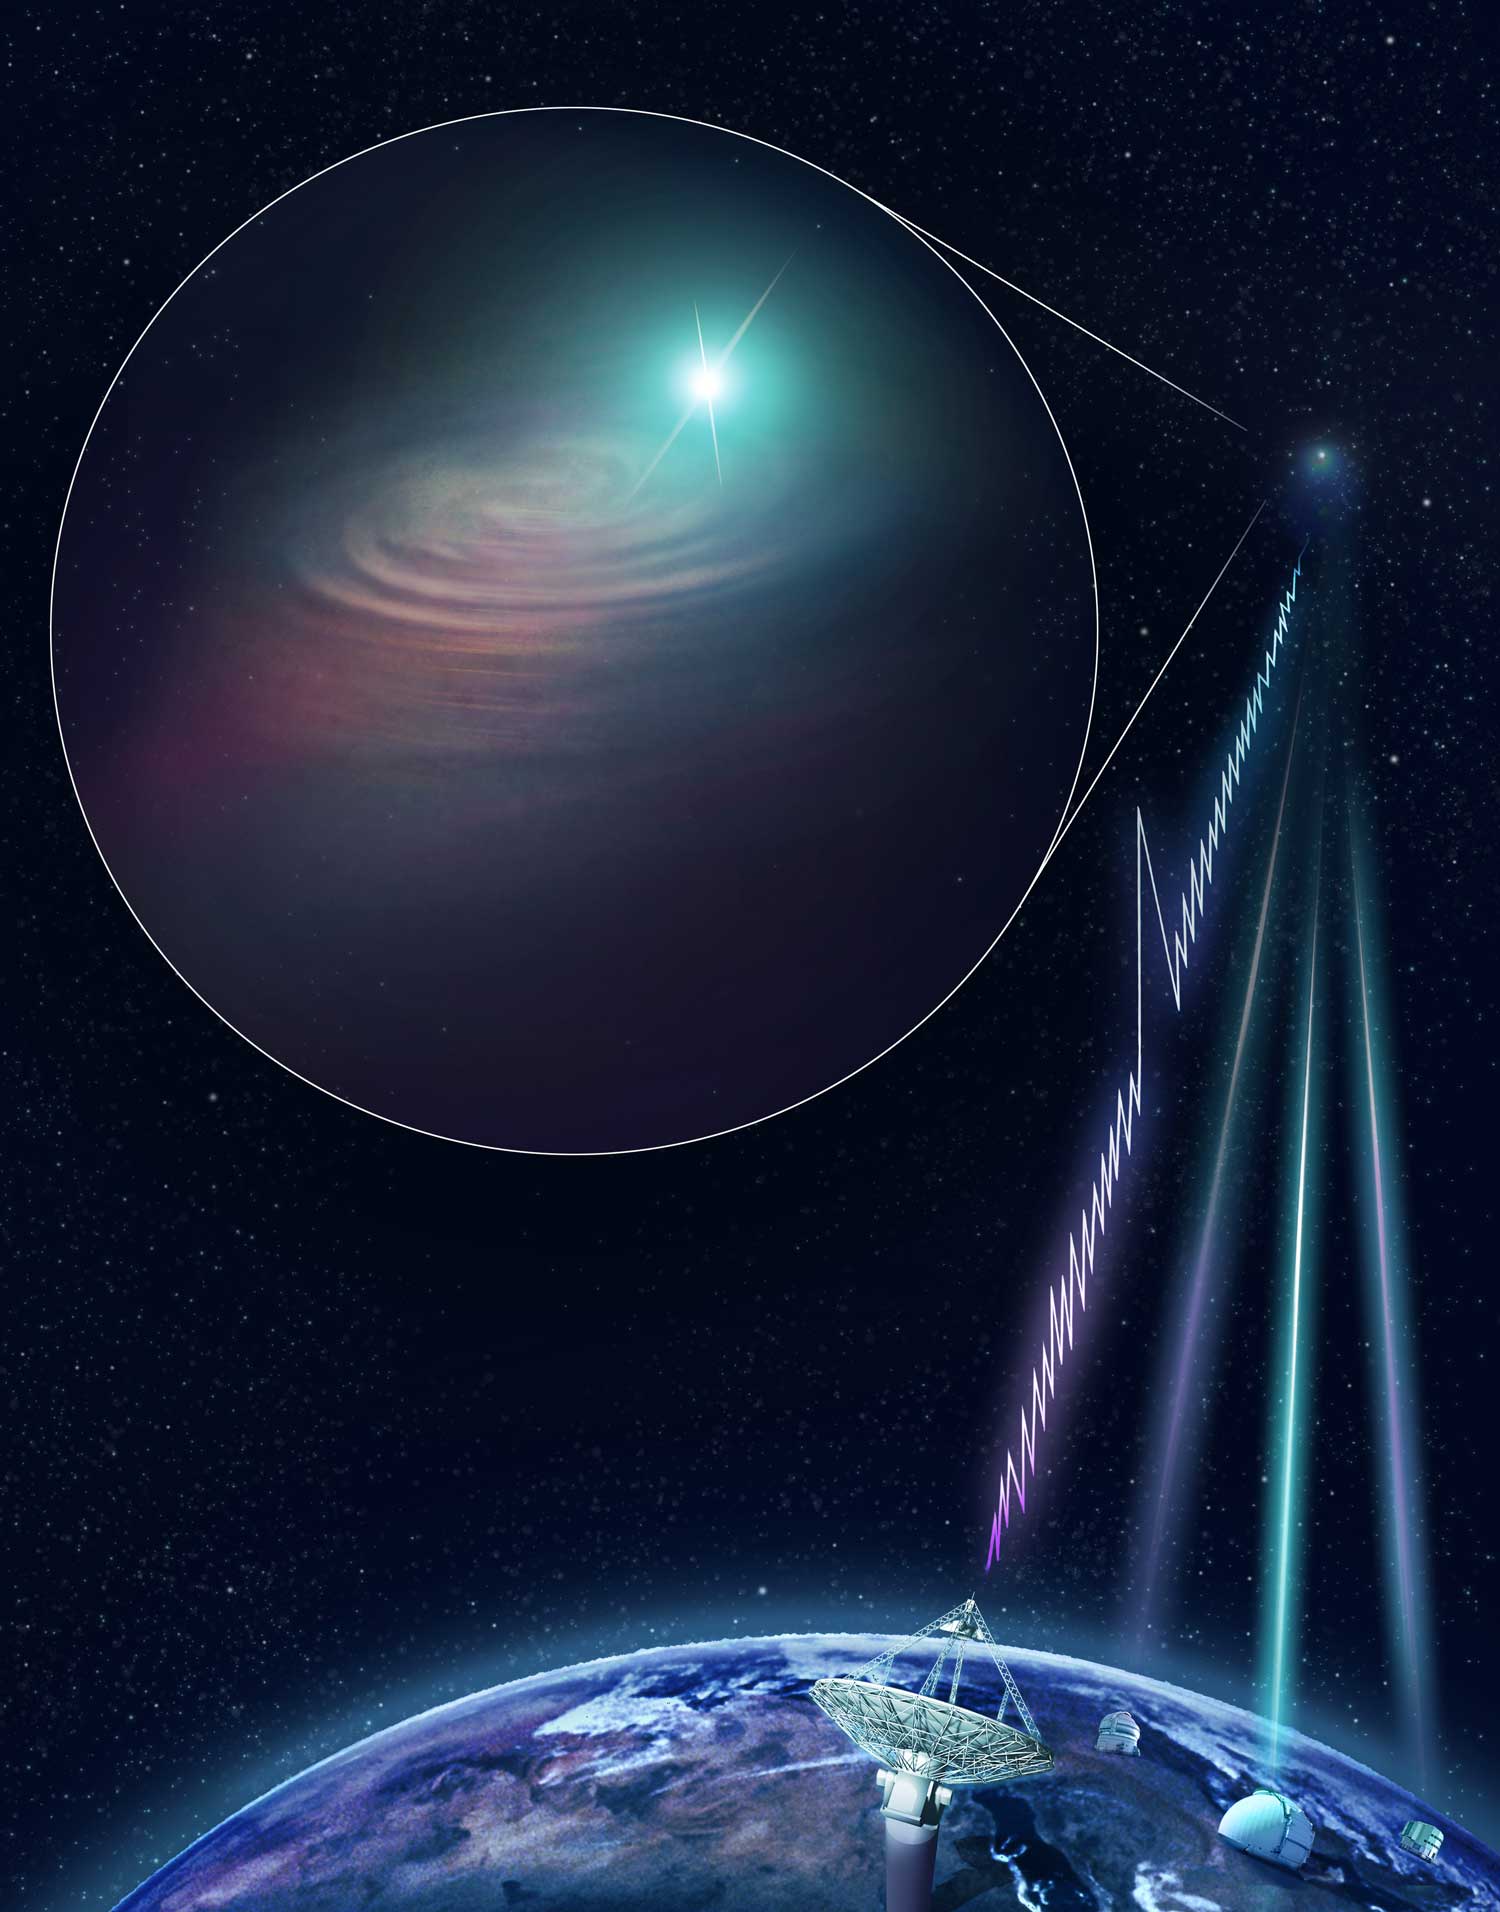 Artist’s impression of CSIRO’s Australian SKA Pathfinder (ASKAP) radio telescope finding a fast radio burst and determining its precise location. The KECK, VLT and Gemini South optical telescopes joined ASKAP with follow-up observations to image the host galaxy. Credit: CSIRO/Dr Andrew Howells